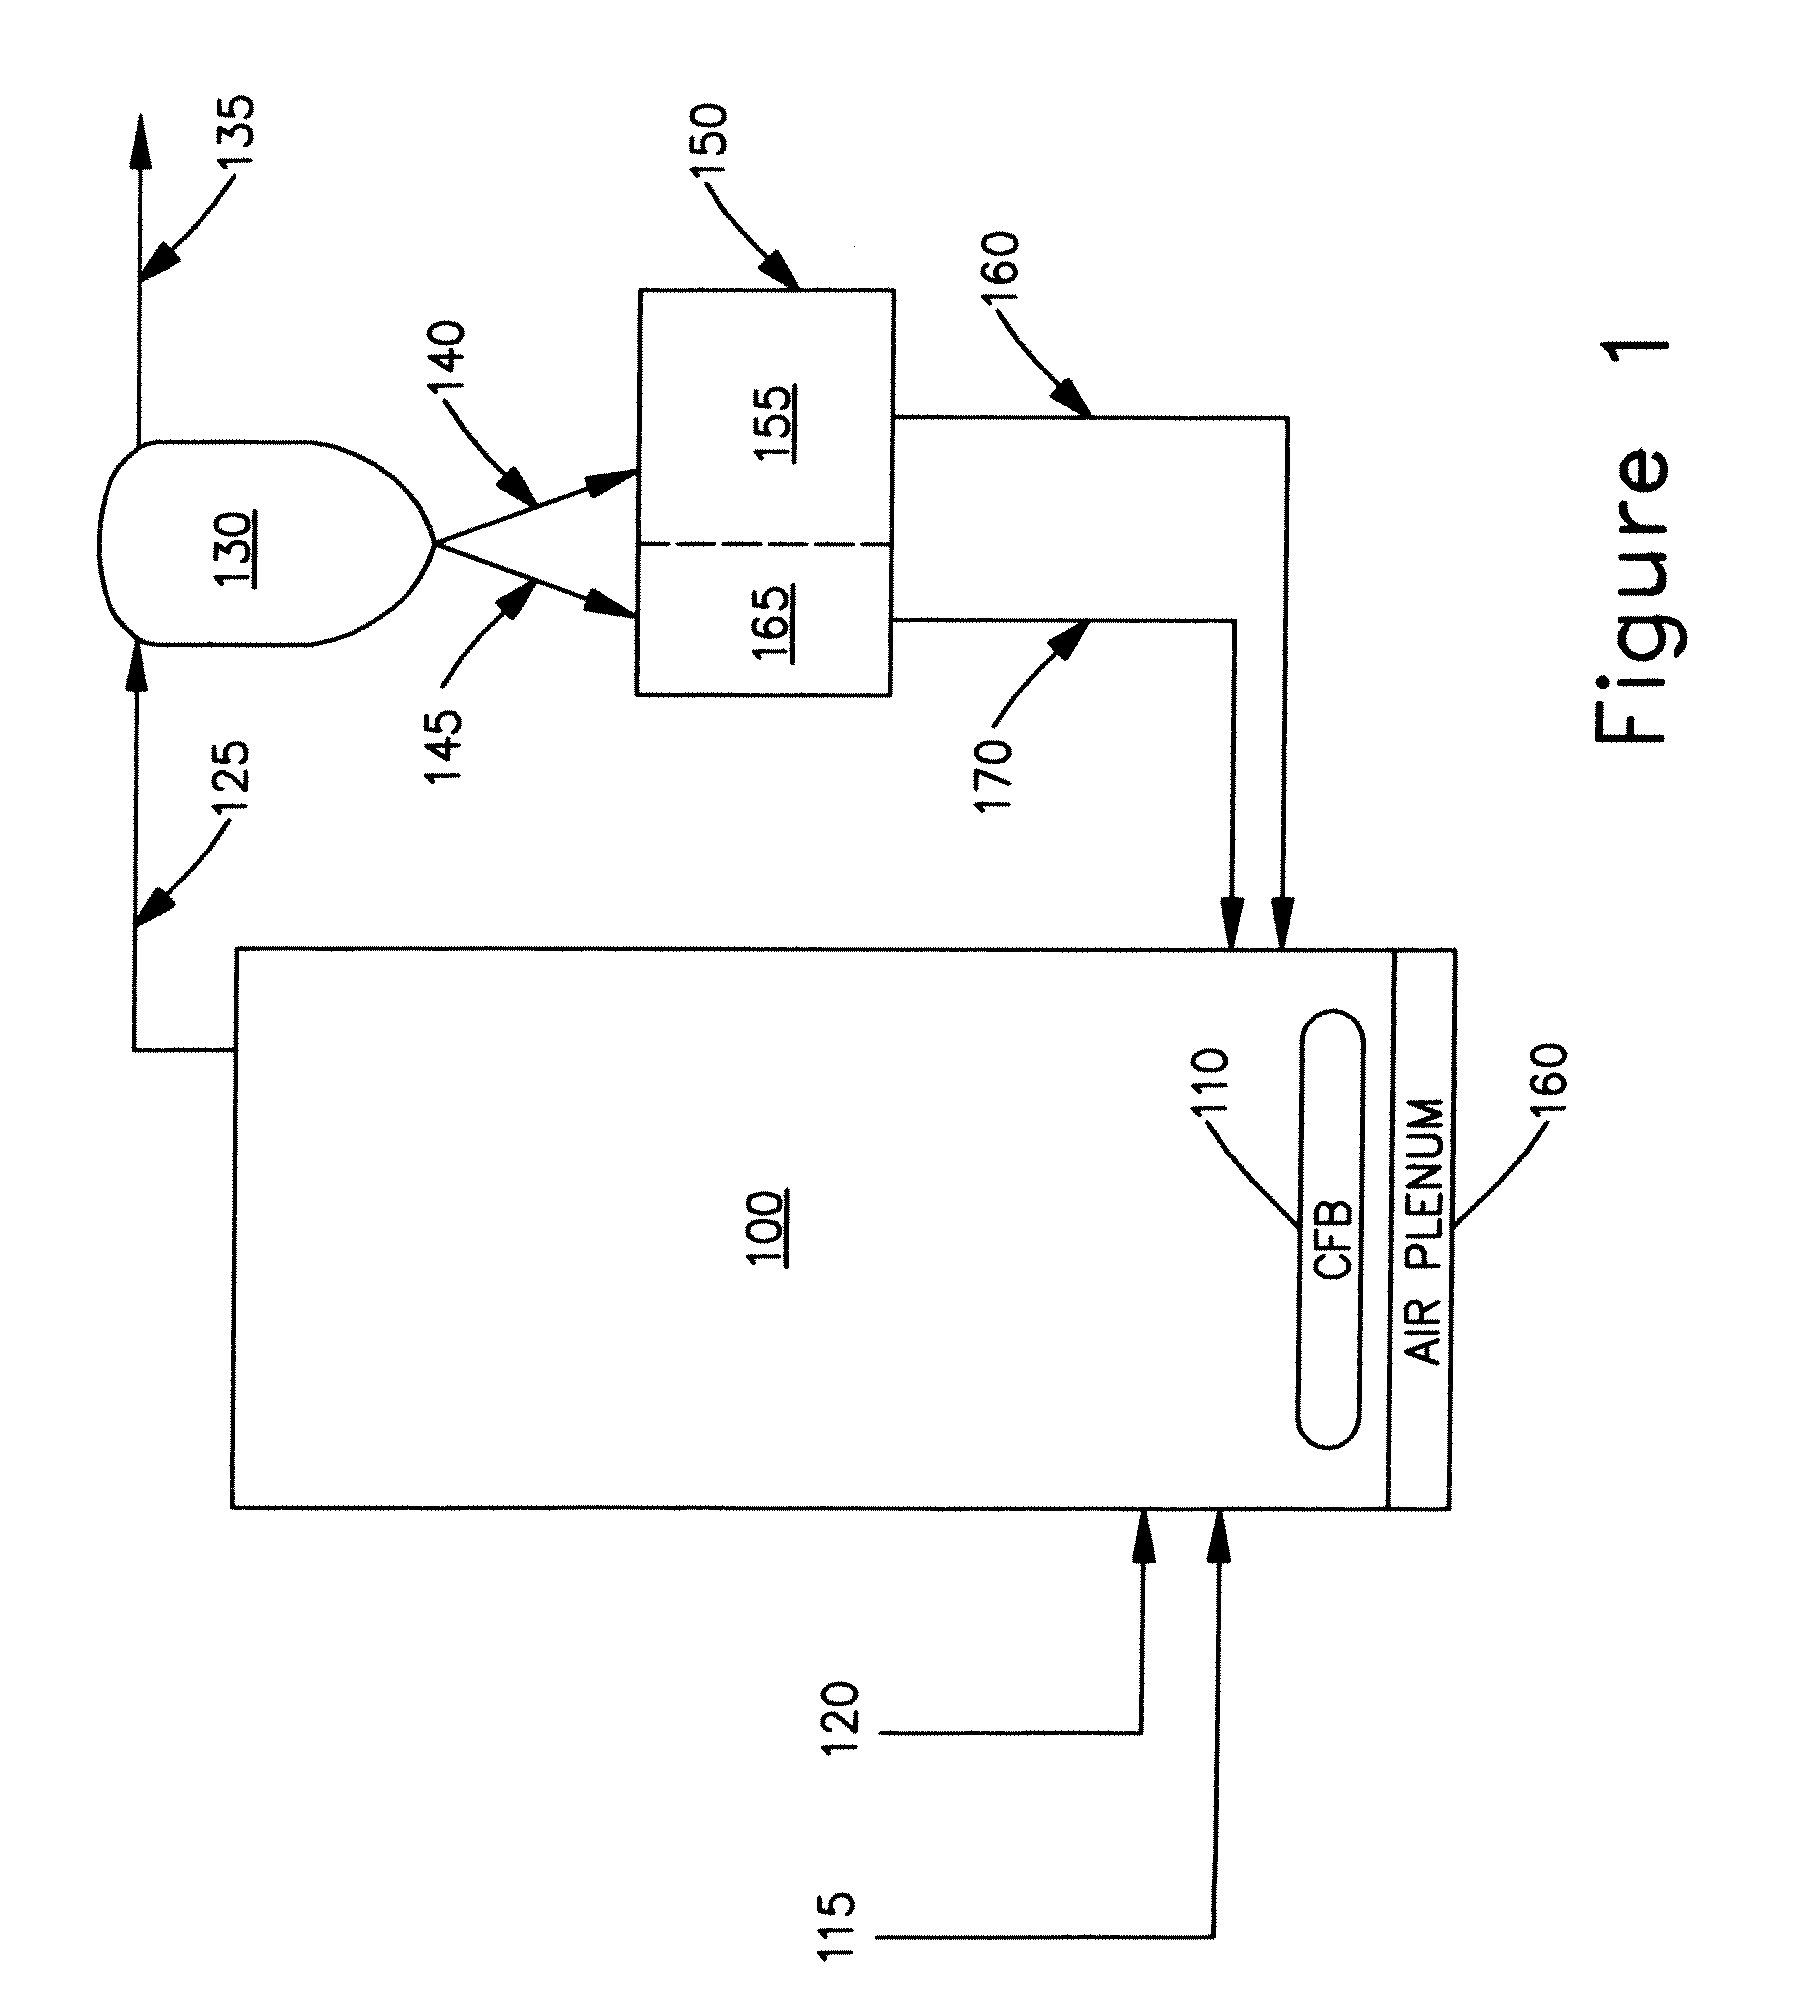 Moving bed heat exchanger for circulating fluidized bed boiler